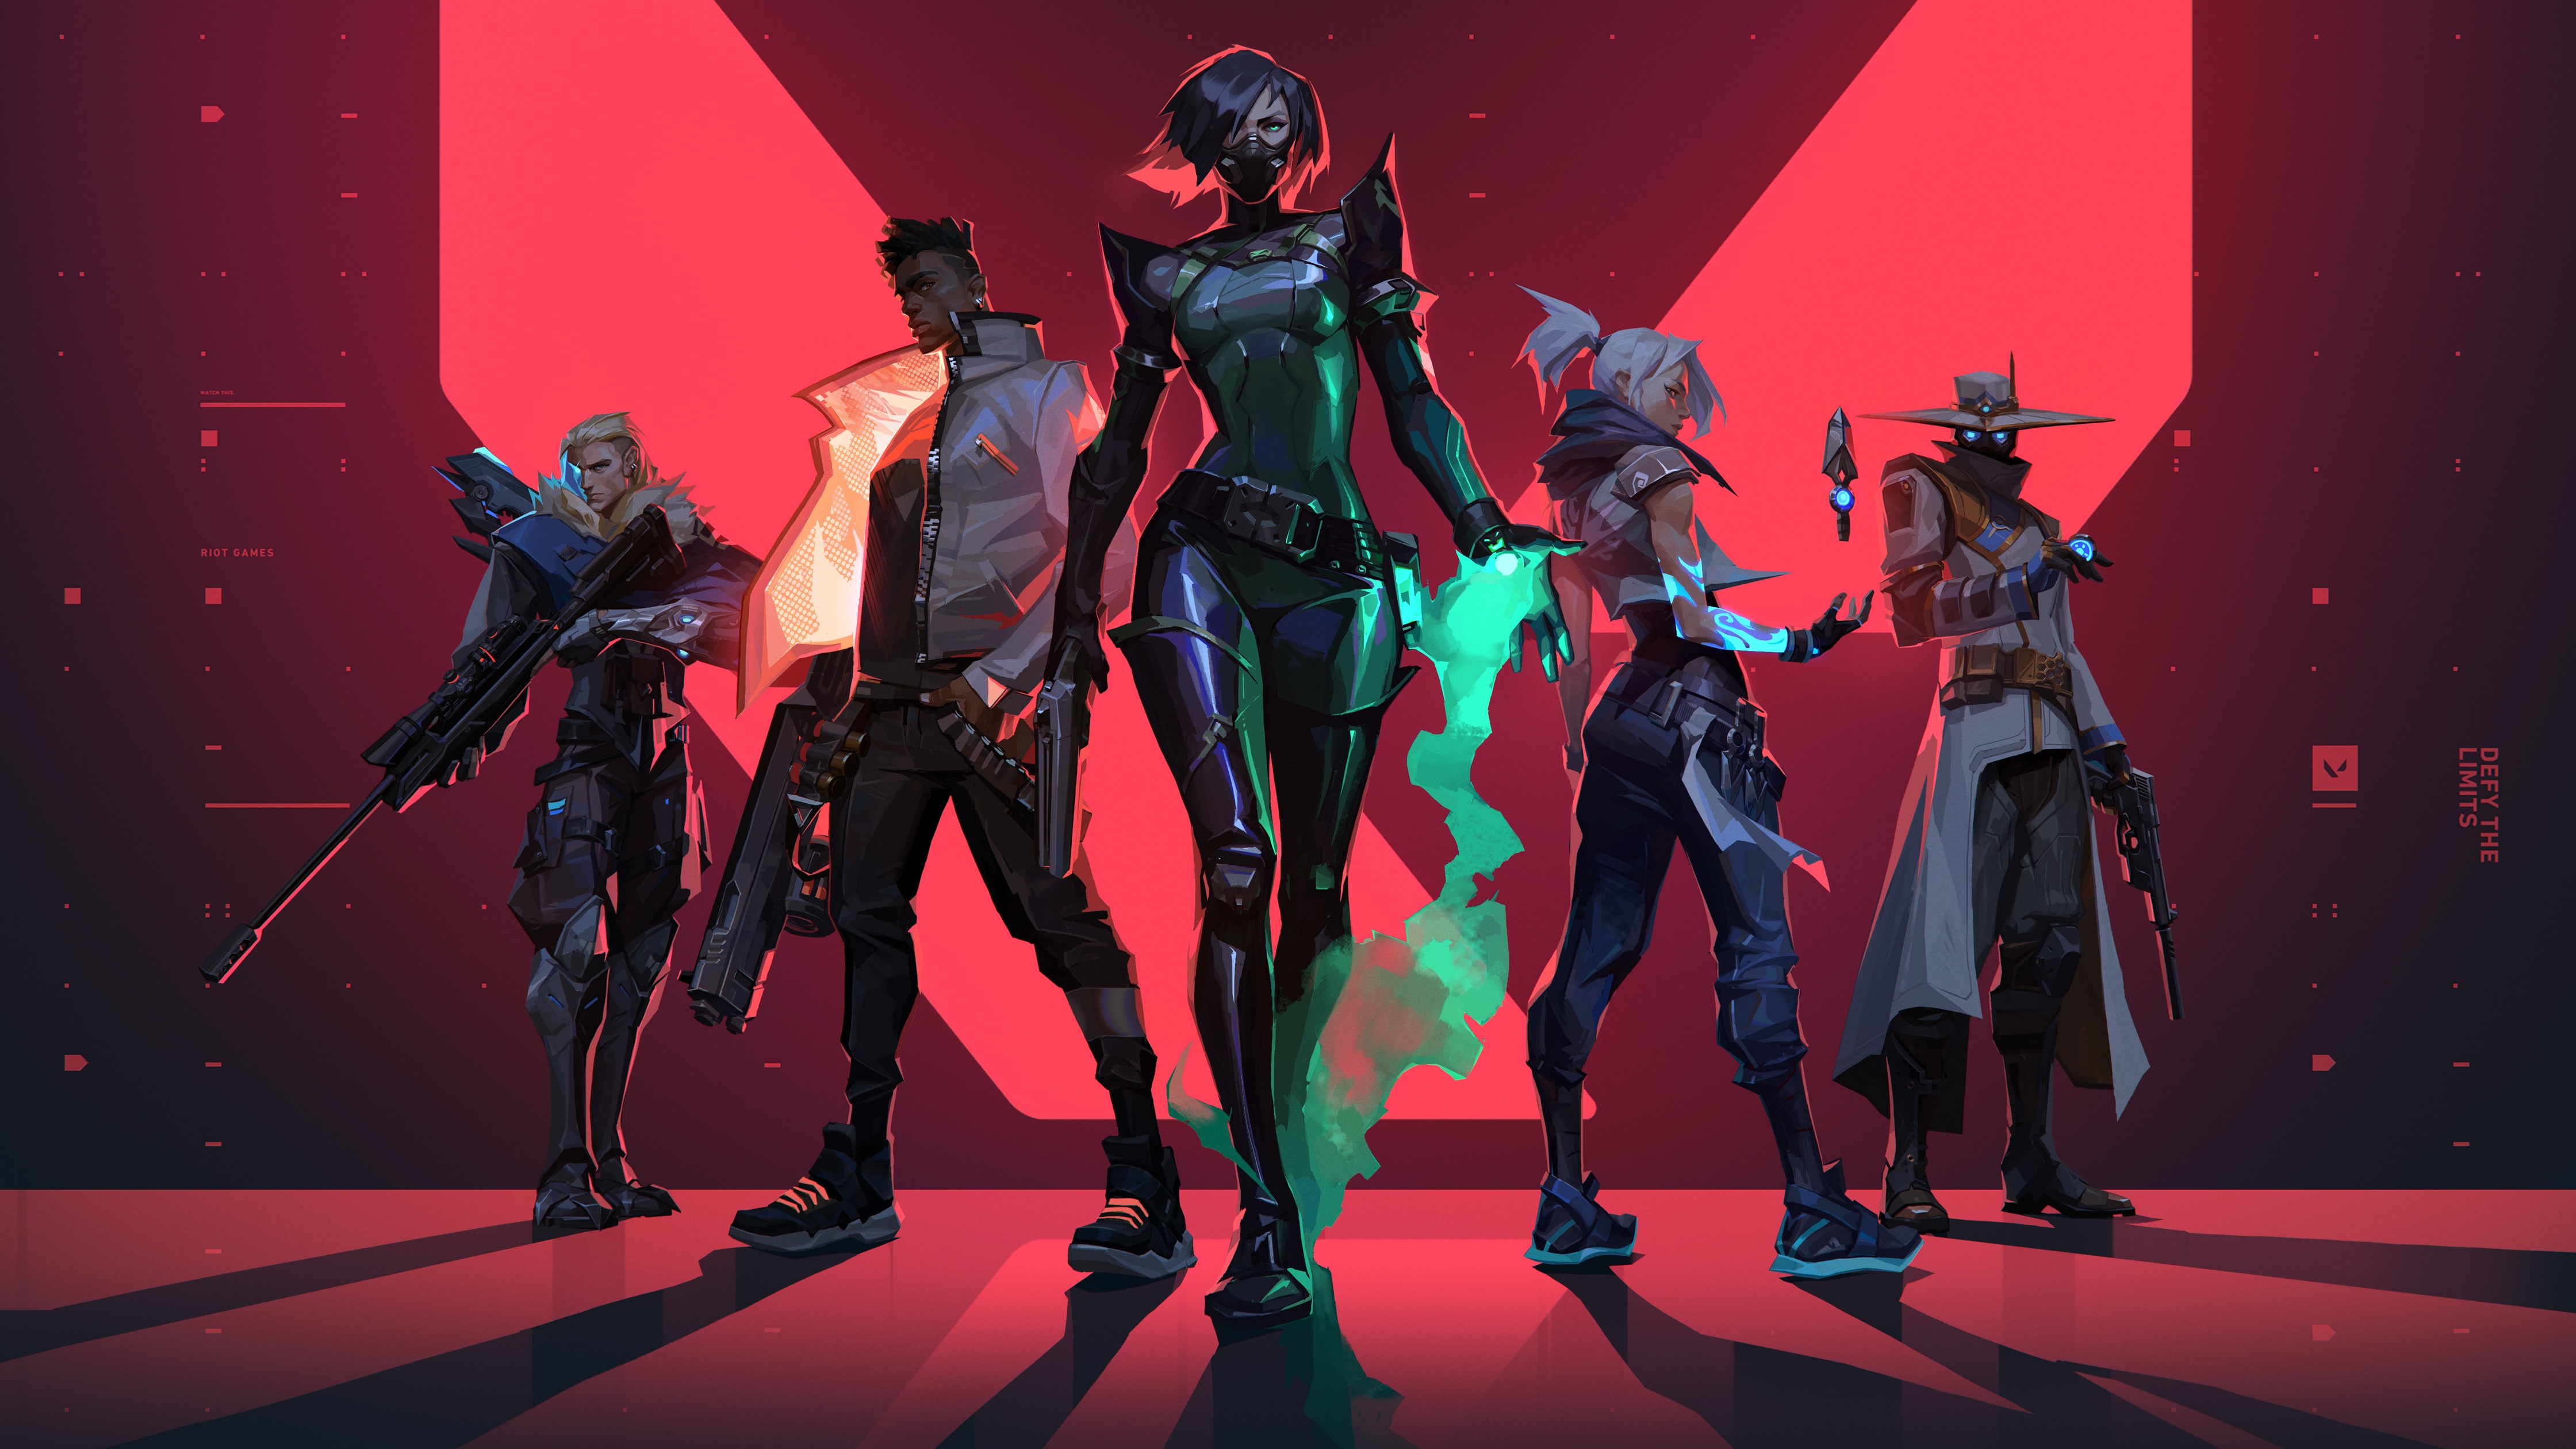 Official artwork from Valorant featuring the game's characters lined up